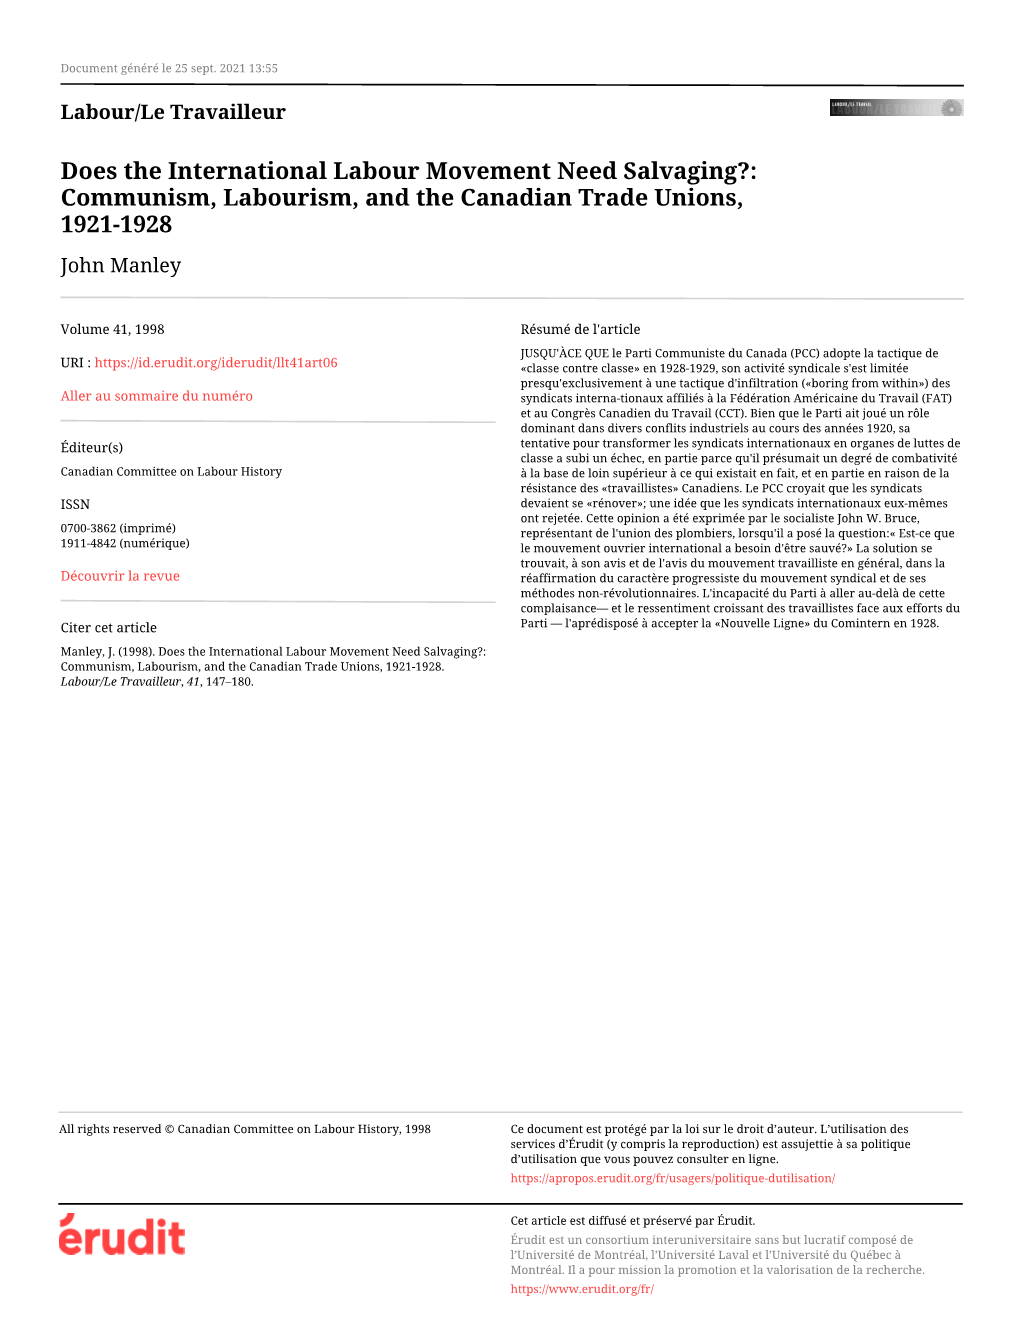 Communism, Labourism, and the Canadian Trade Unions, 1921-1928 John Manley